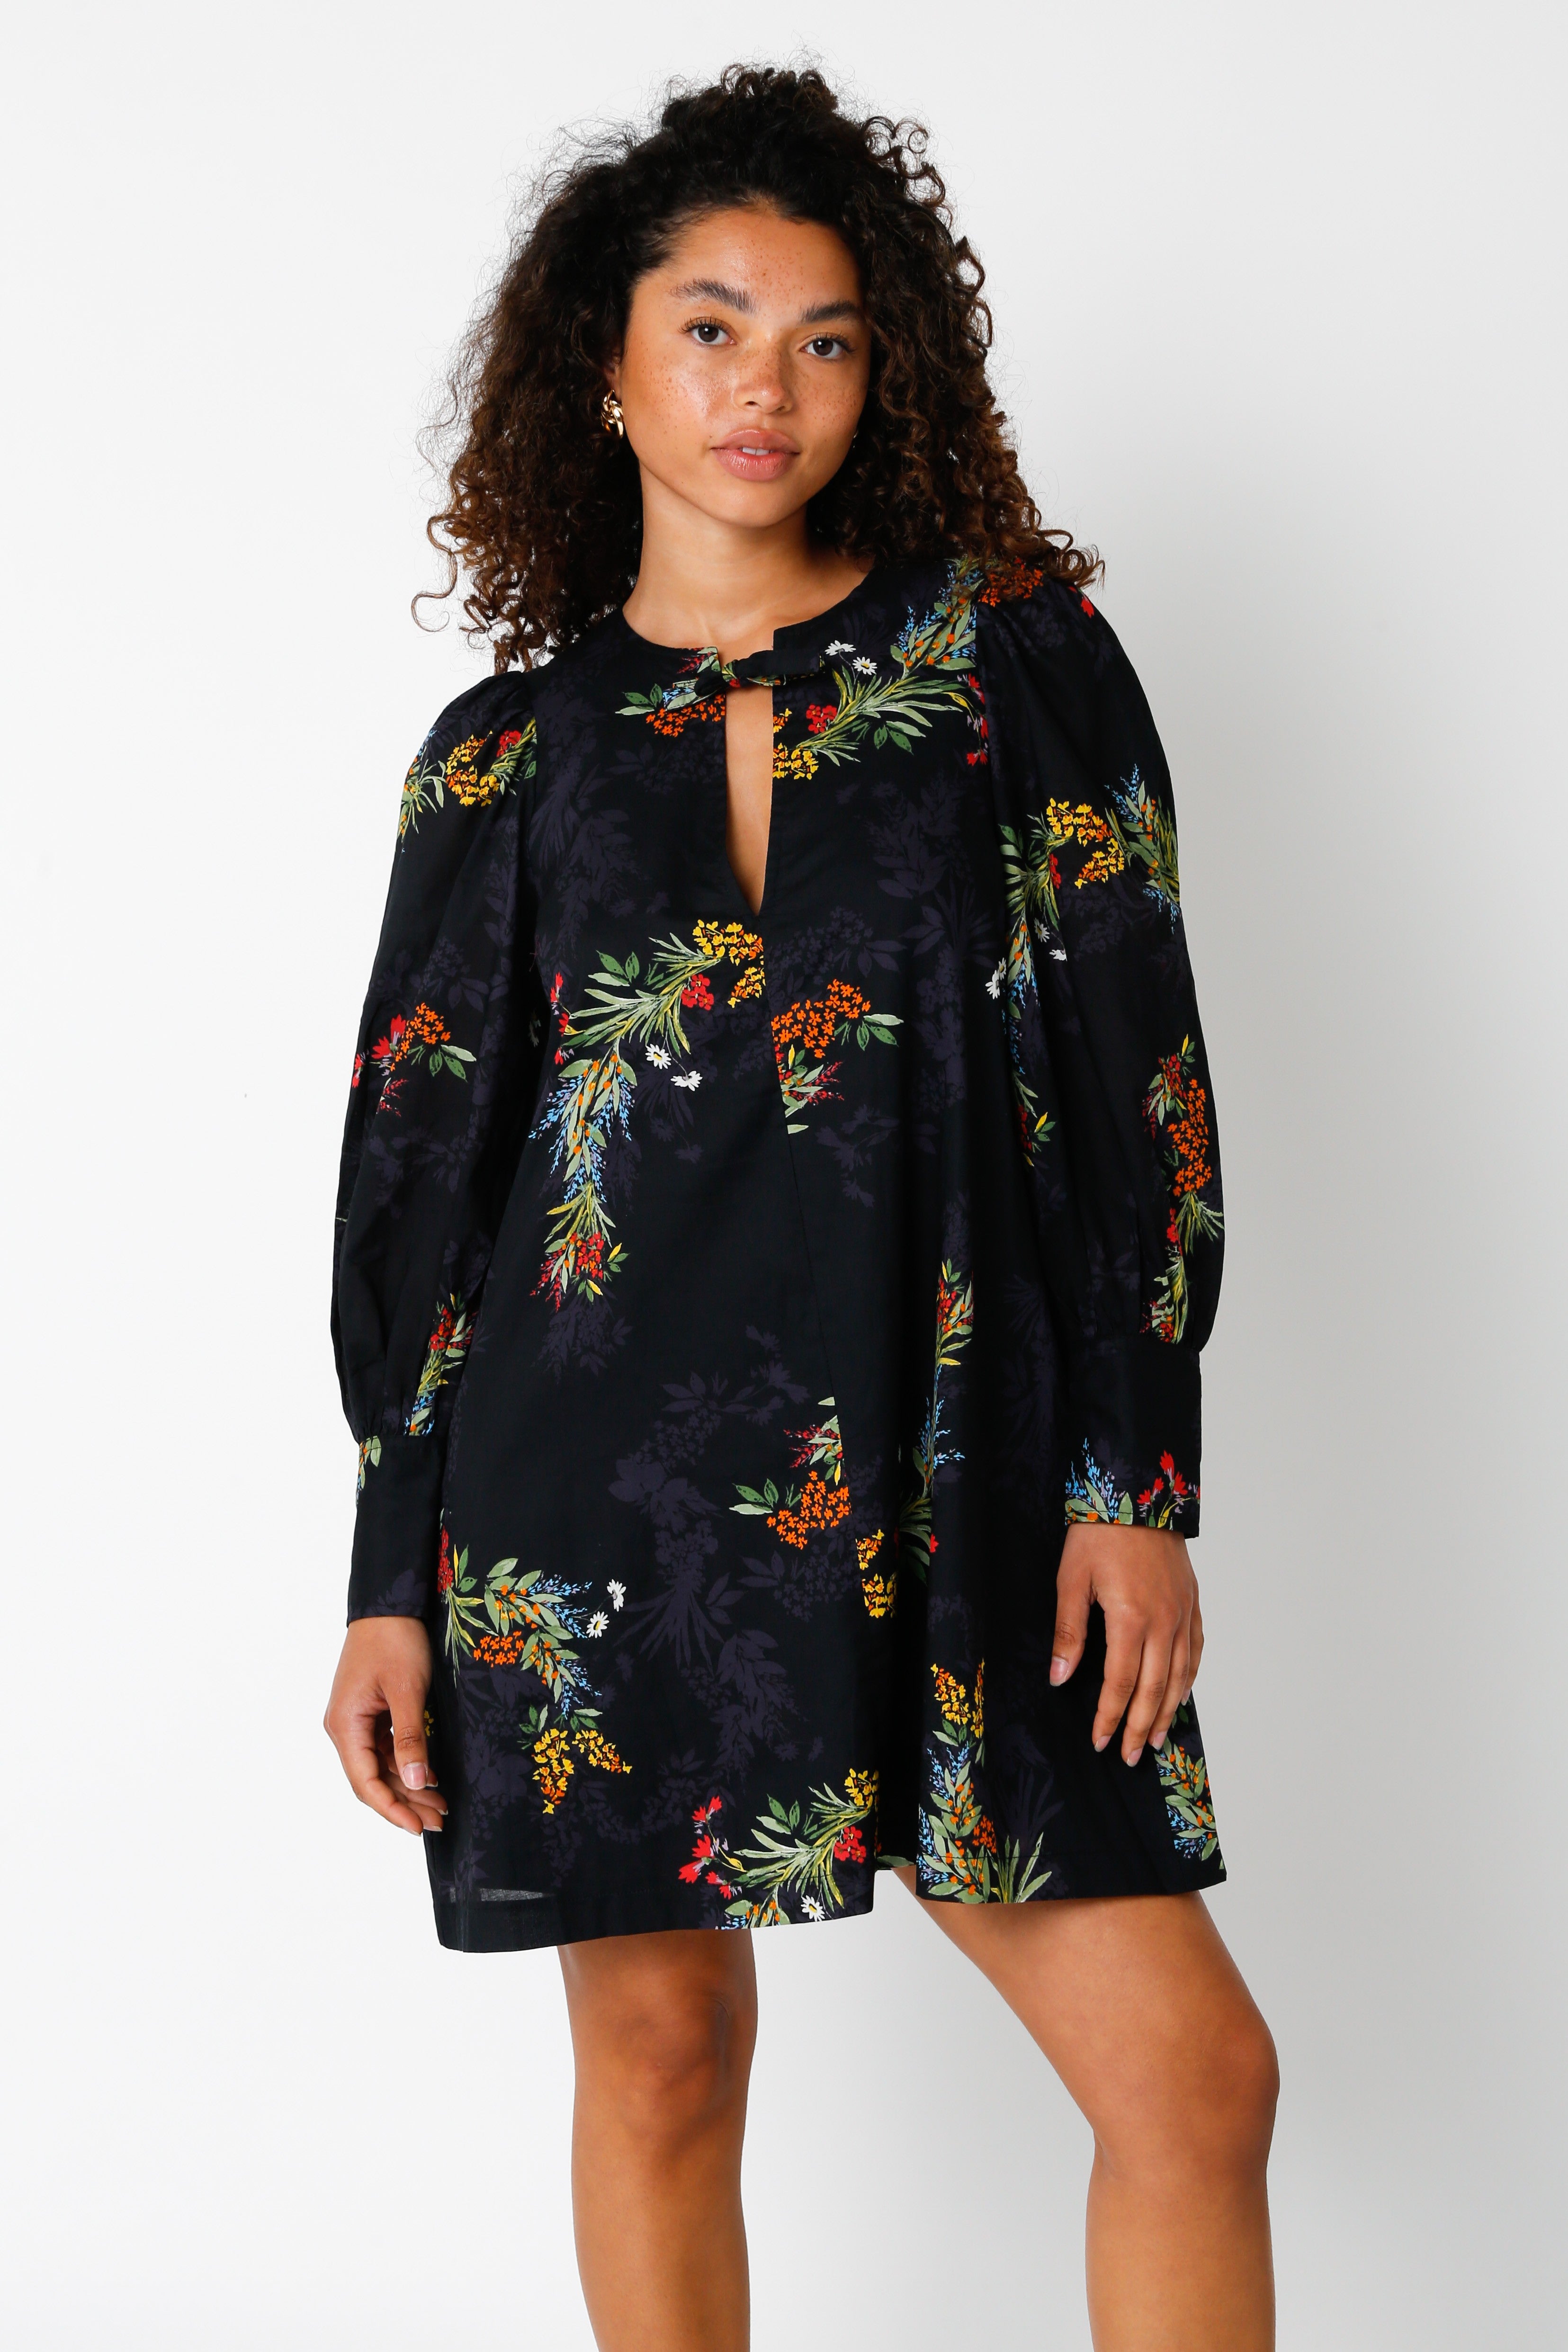 FLOWER PRINT LONG SLEEVE DRESS WITH POCKETS